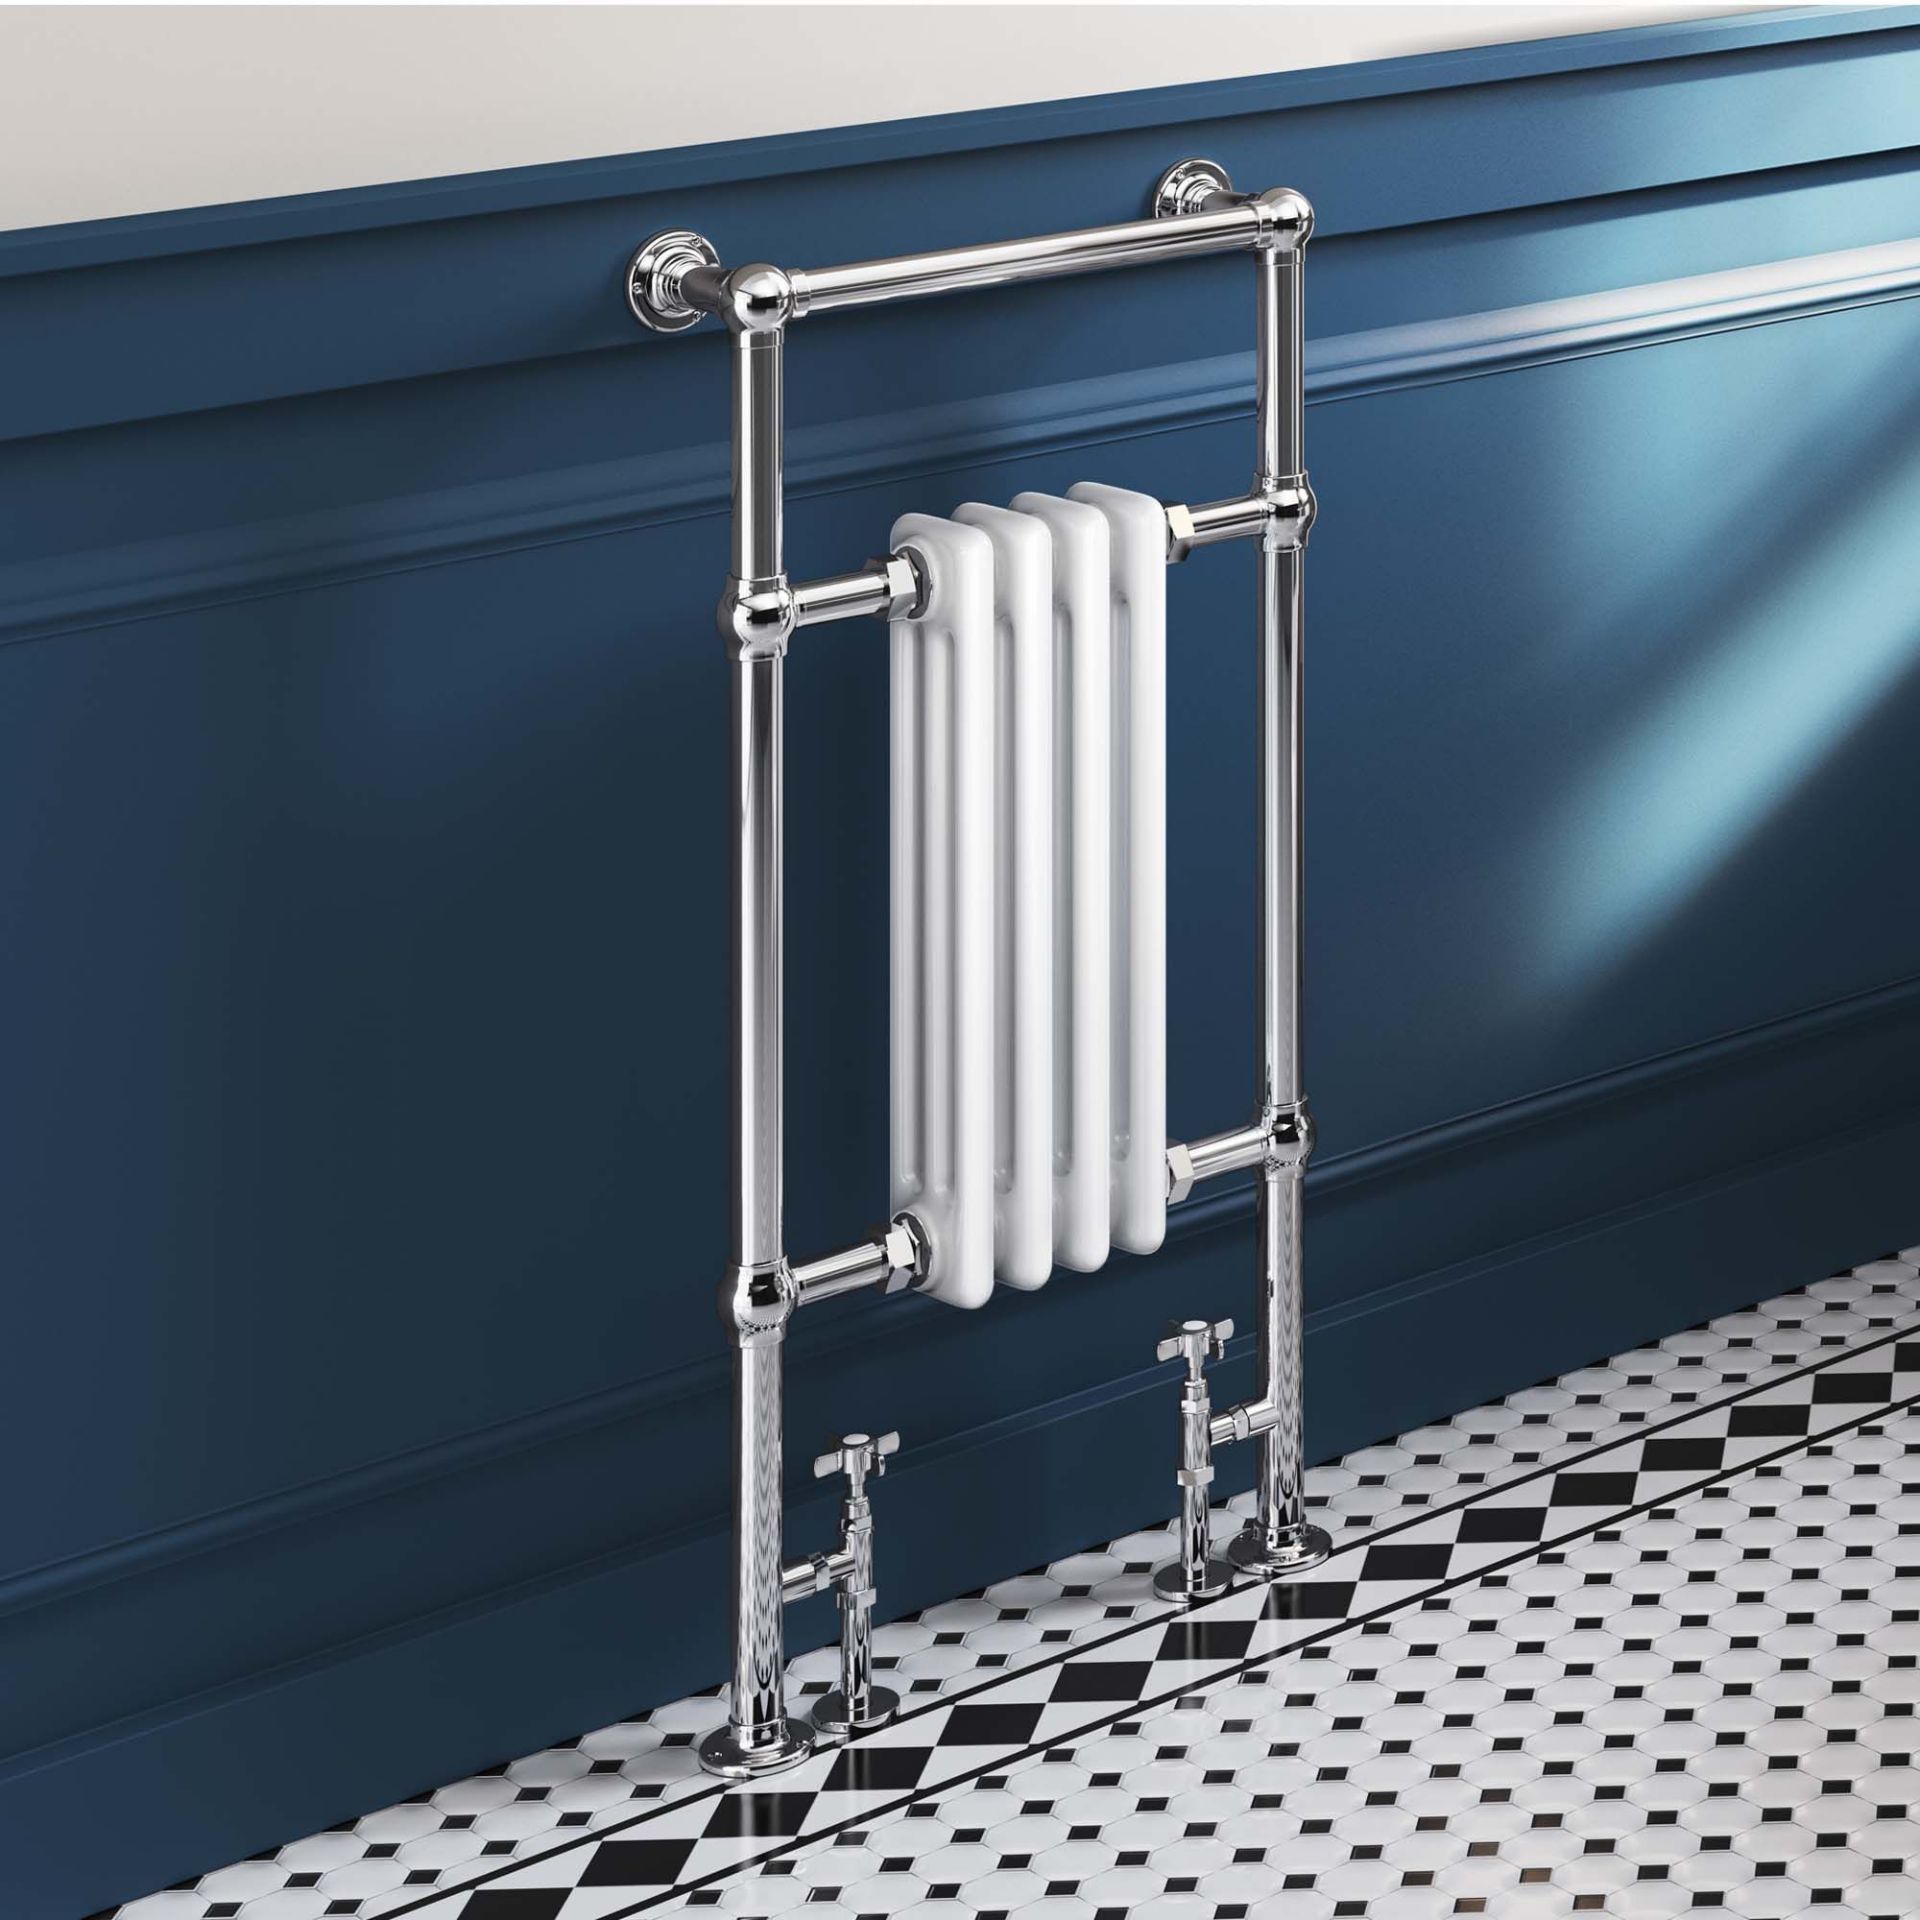 (DK13) 952x479mm Traditional White Slim Towel Rail Radiator - Cambridge. RRP £172.99. Made from